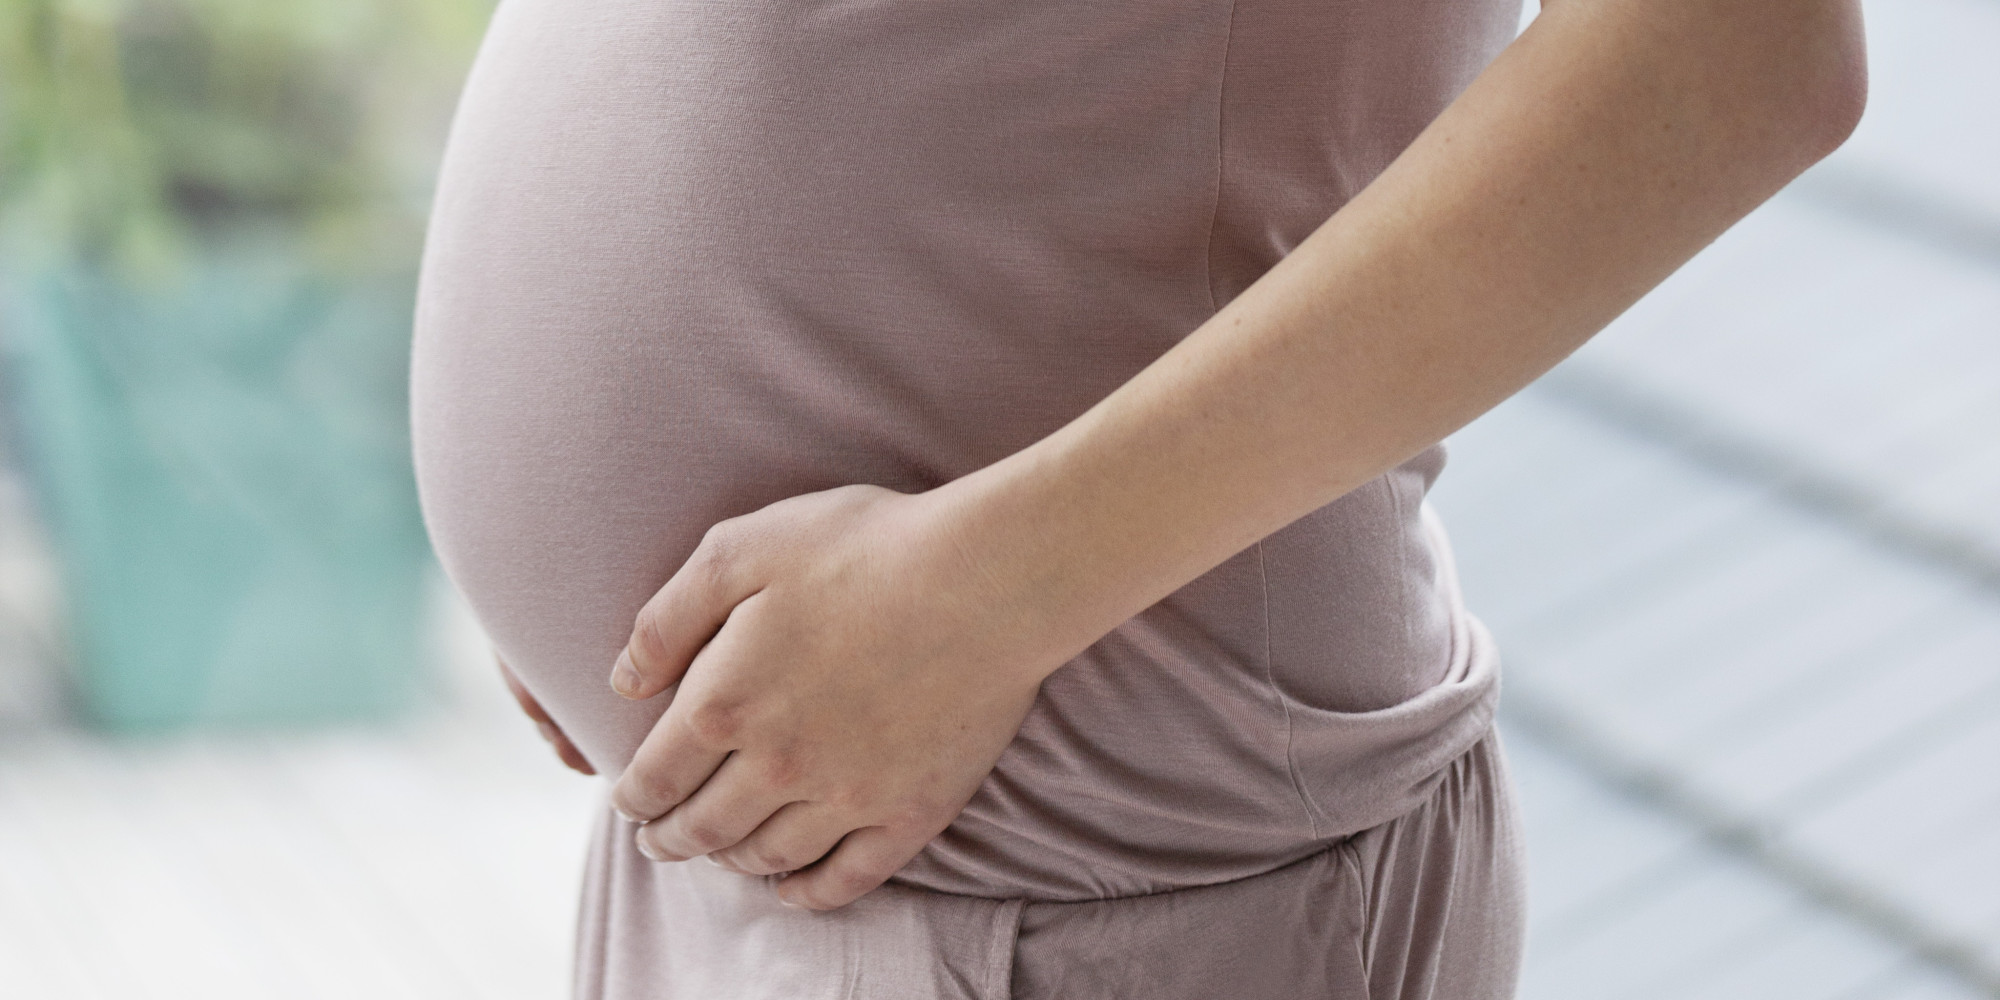 'Full Term' Pregnancy Gets A More Precise Definition From Doctors